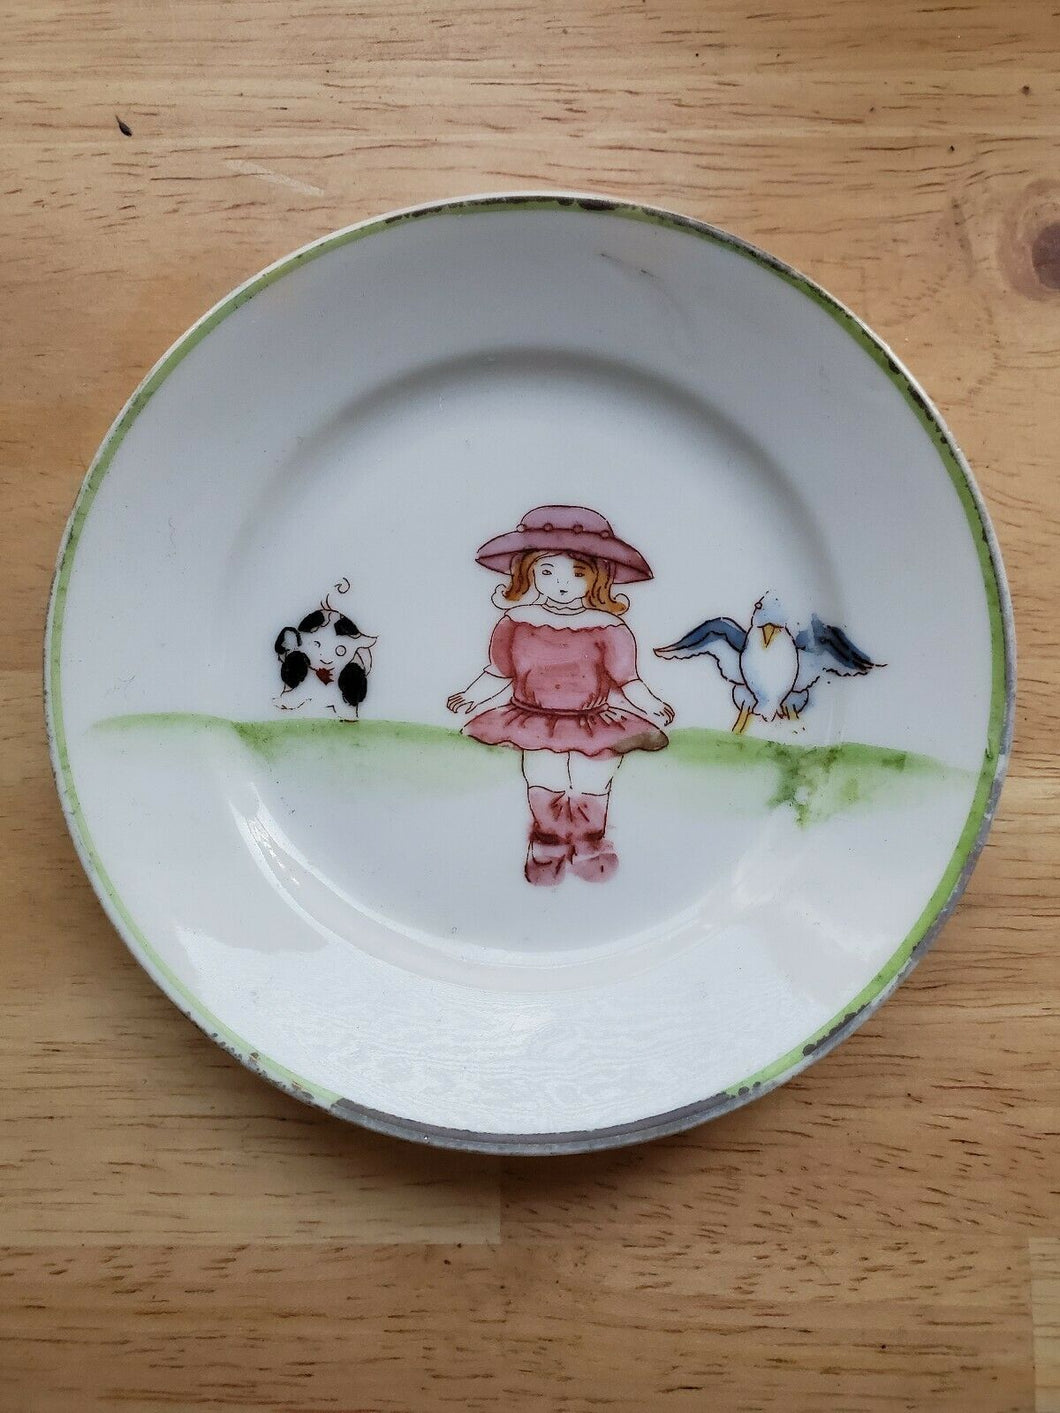 Vintage Hand Painted Nippon Little Girl With Animals Nut/Candy Dish